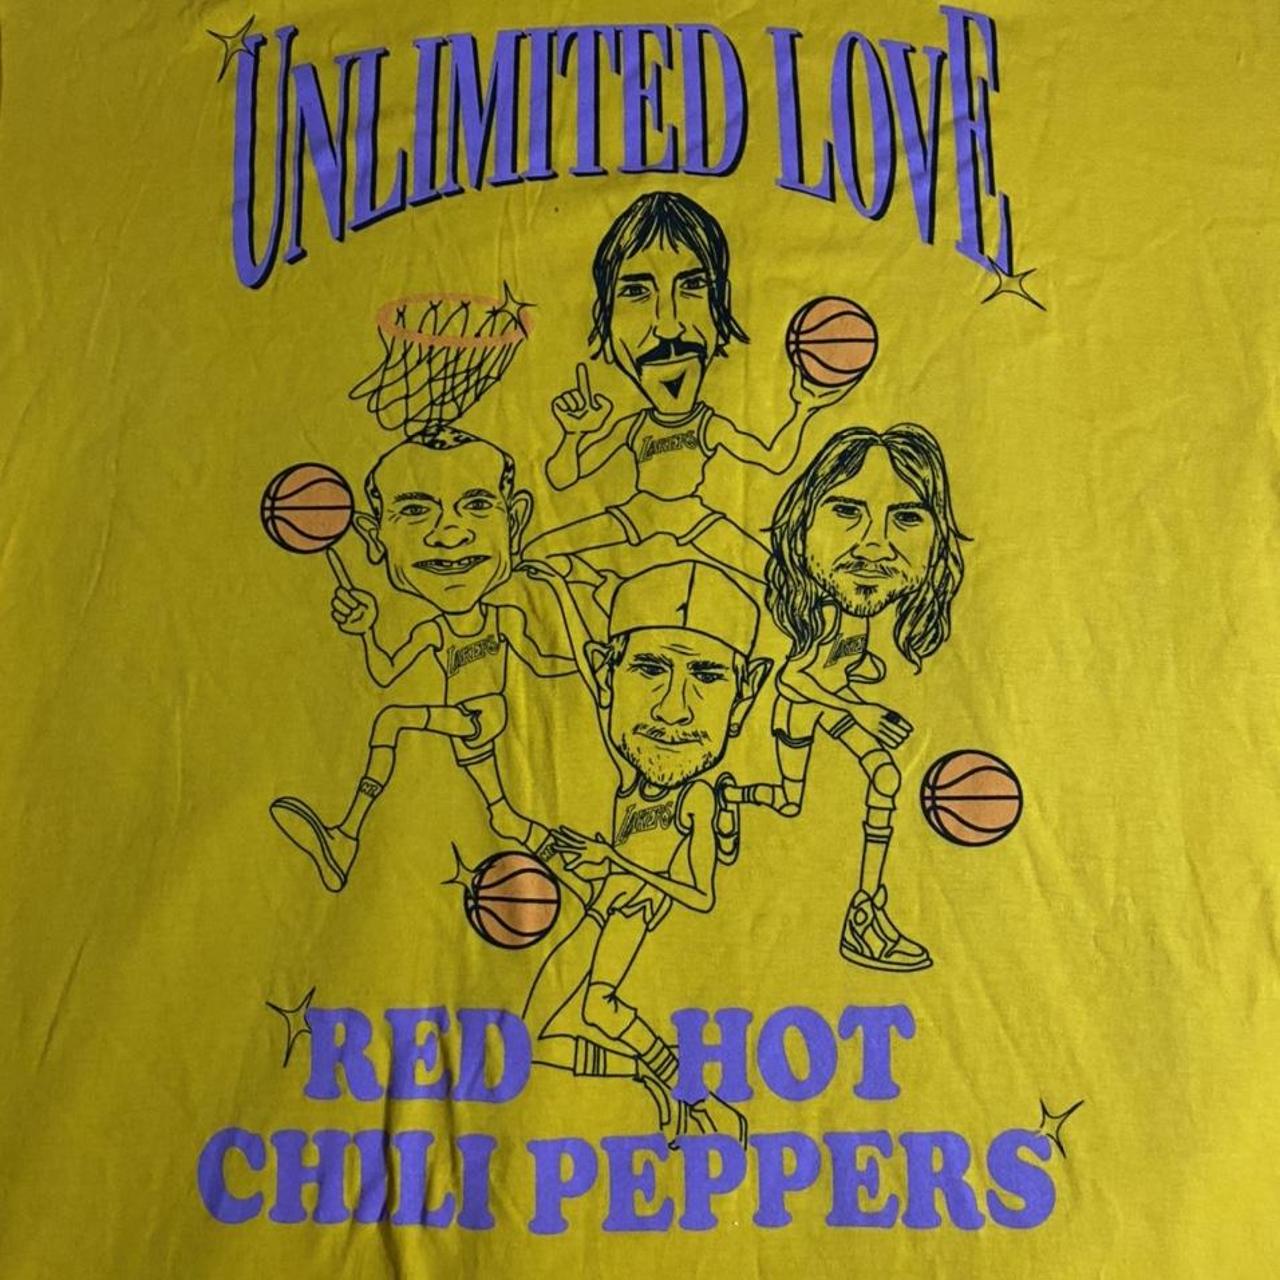 Lakers x Red Hot Chili Peppers Unlimited Love - Depop